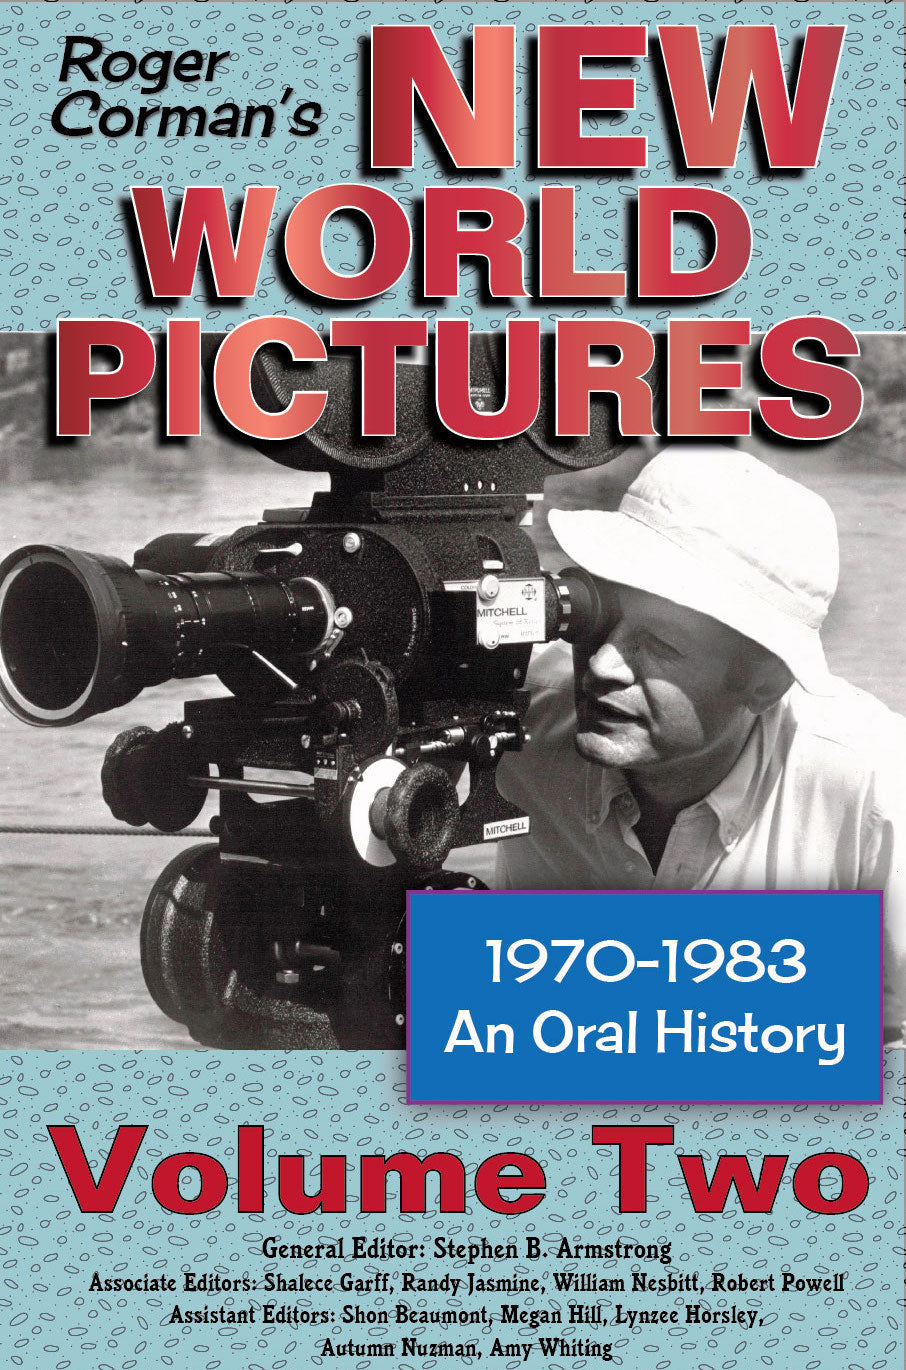 Roger Corman’s New World Pictures, 1970-1983: An Oral History, Vol. 2 (ebook)